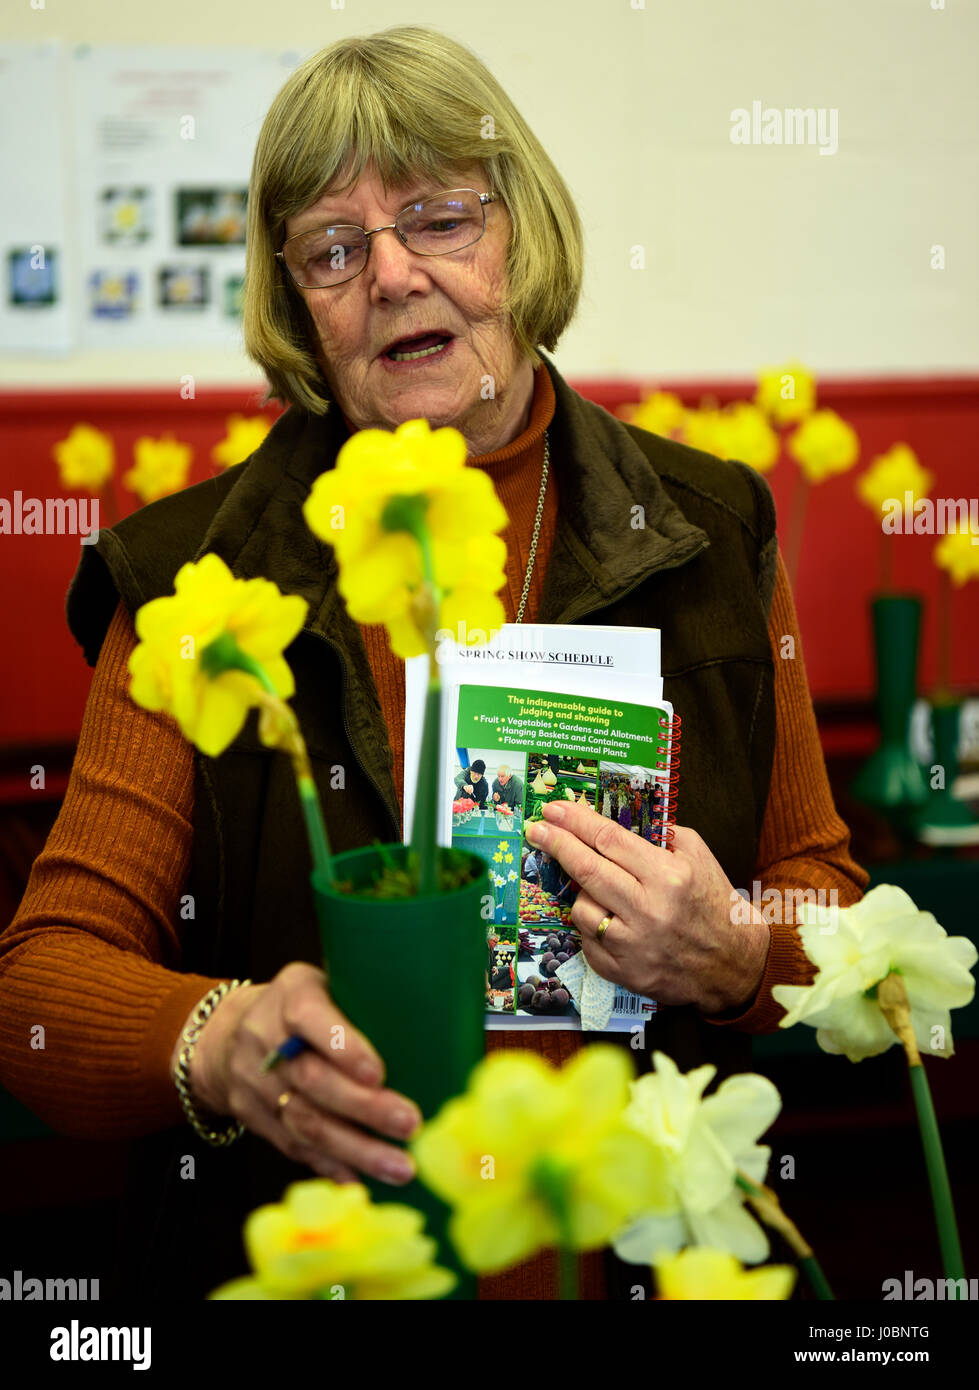 Judging of the daffodils in progress at a local spring flower show, Four Marks, near Alton, Hampshire, UK. 1 April 2017. Stock Photo